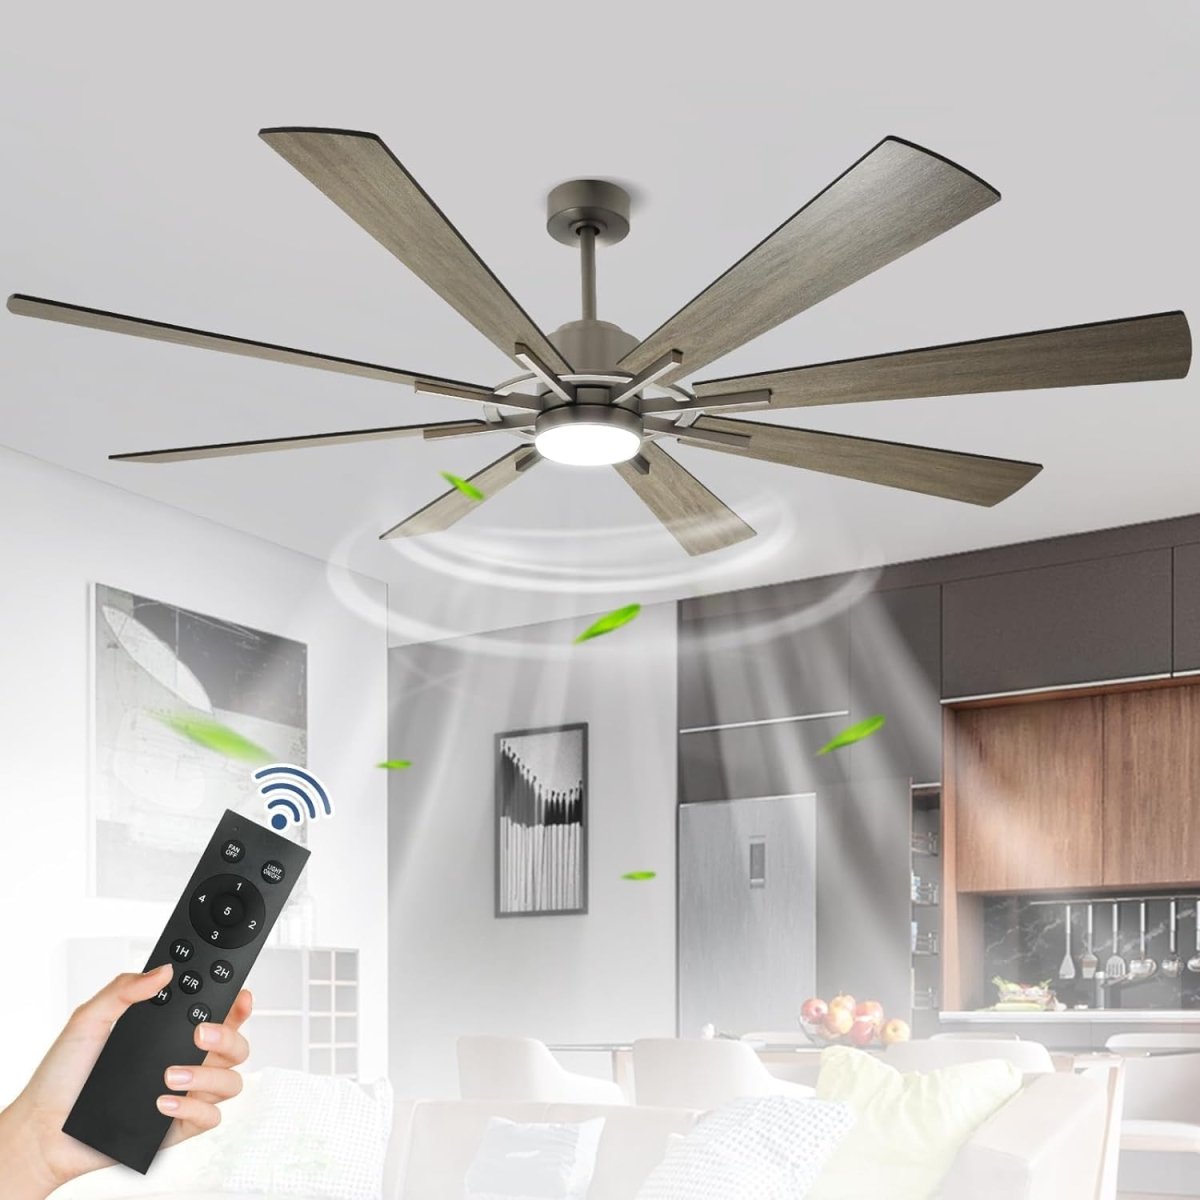 Depuley Large Ceiling Fan with Lights, 72" DC Reversible Ceiling Fan with Light LED, 8 Plywood Blades 5 Speed, Modern Industrial Ceiling Fans Indoor for Living Room, Color Changeable 3000K-6000K, Gray - WS-FPZ45-18C-GR 1 | DEPULEY